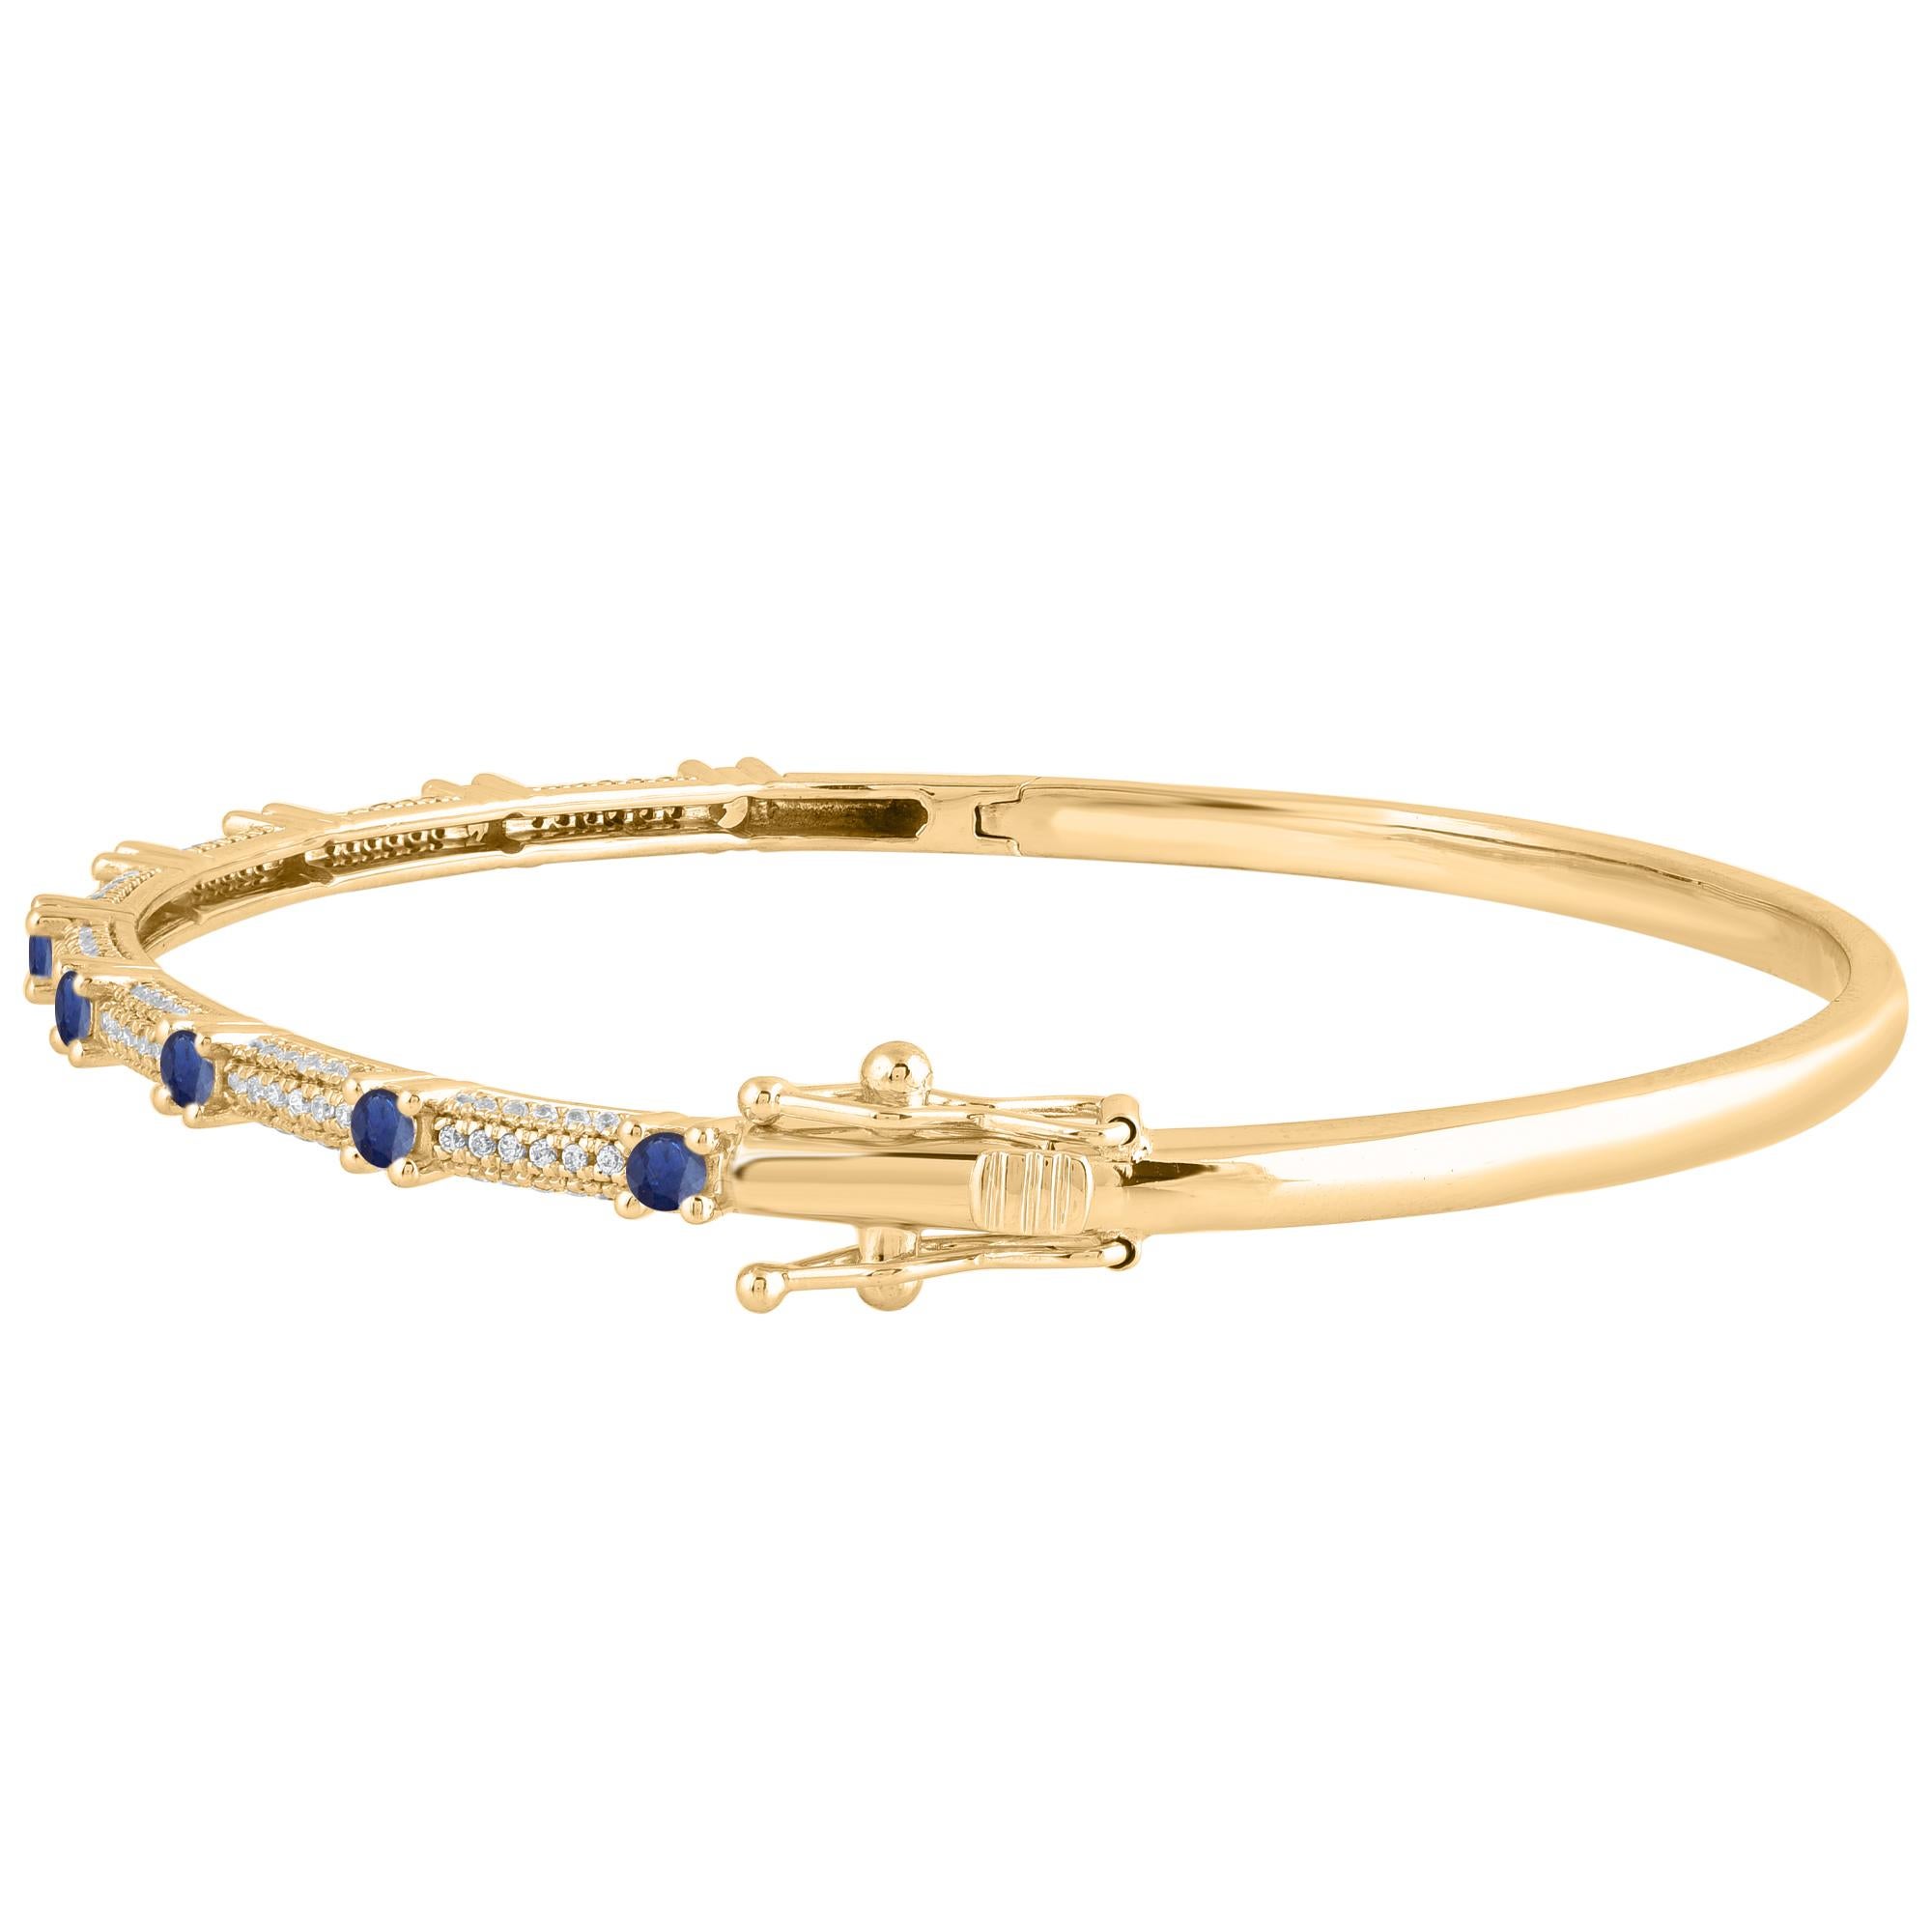 A minimalist look with a pop of color, this blue sapphire and diamond bangle bracelet pairs well with most any attire. This Shimmering bangle bracelet features 134 natural 0.50ct round single cut diamonds and 0.50 carats 9 blue sapphire set in prong